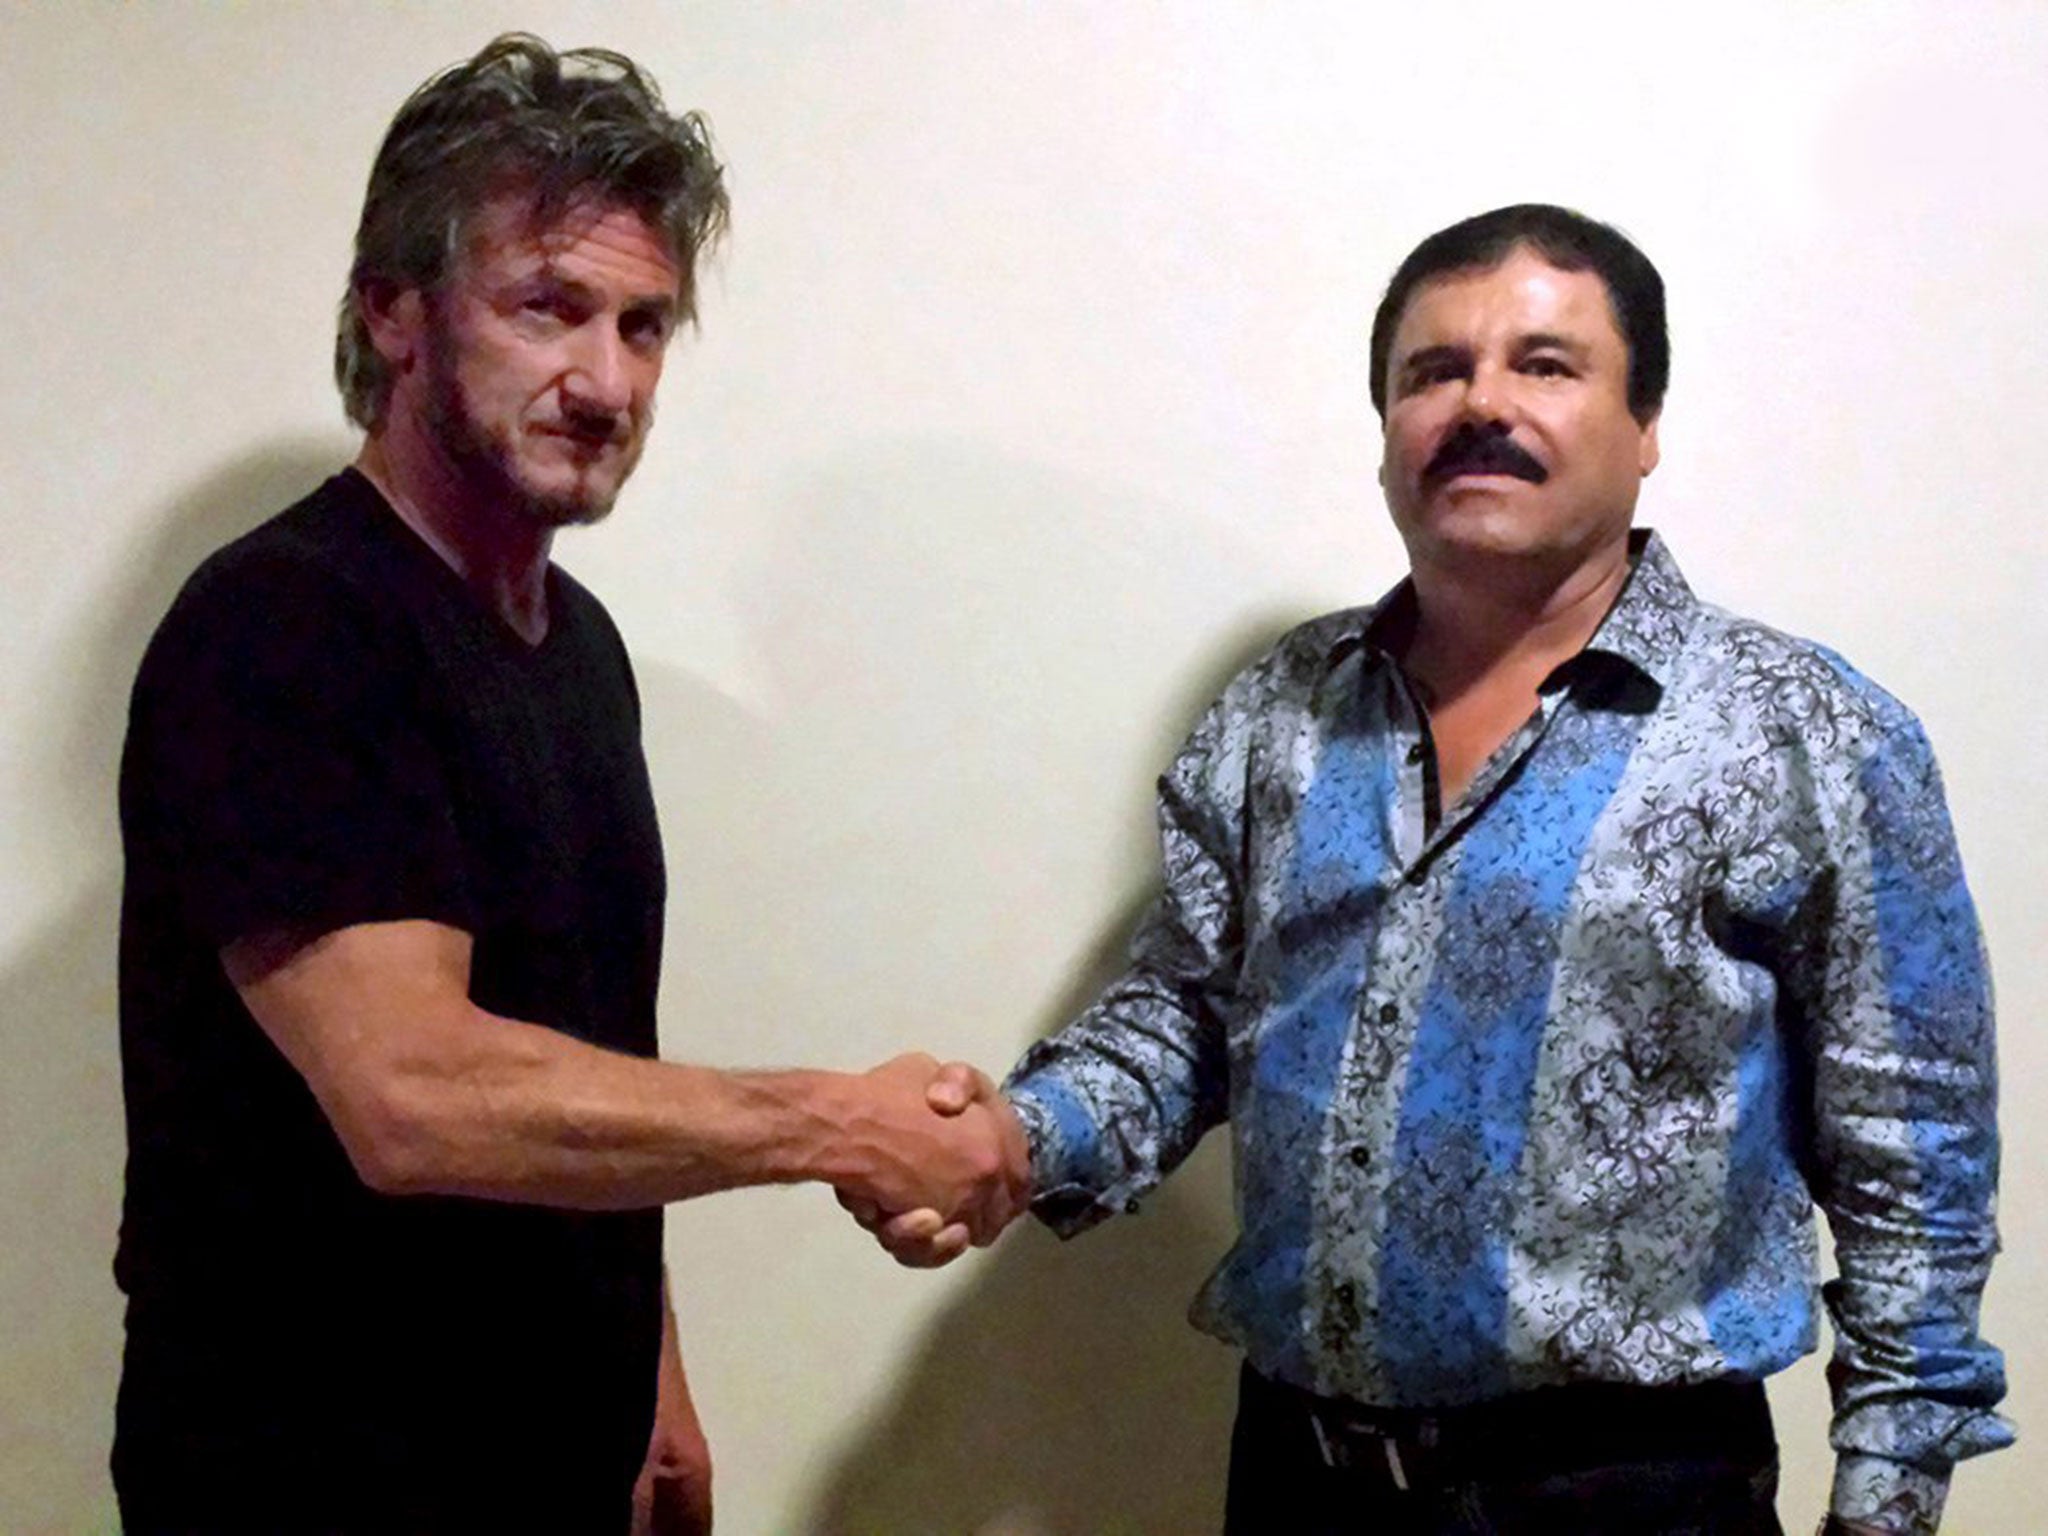 Hollywood star Sean Penn is facing online ridicule over his bizarre write-up of his meeting with drug lord Joaquin ‘El Chapo’ Guzman